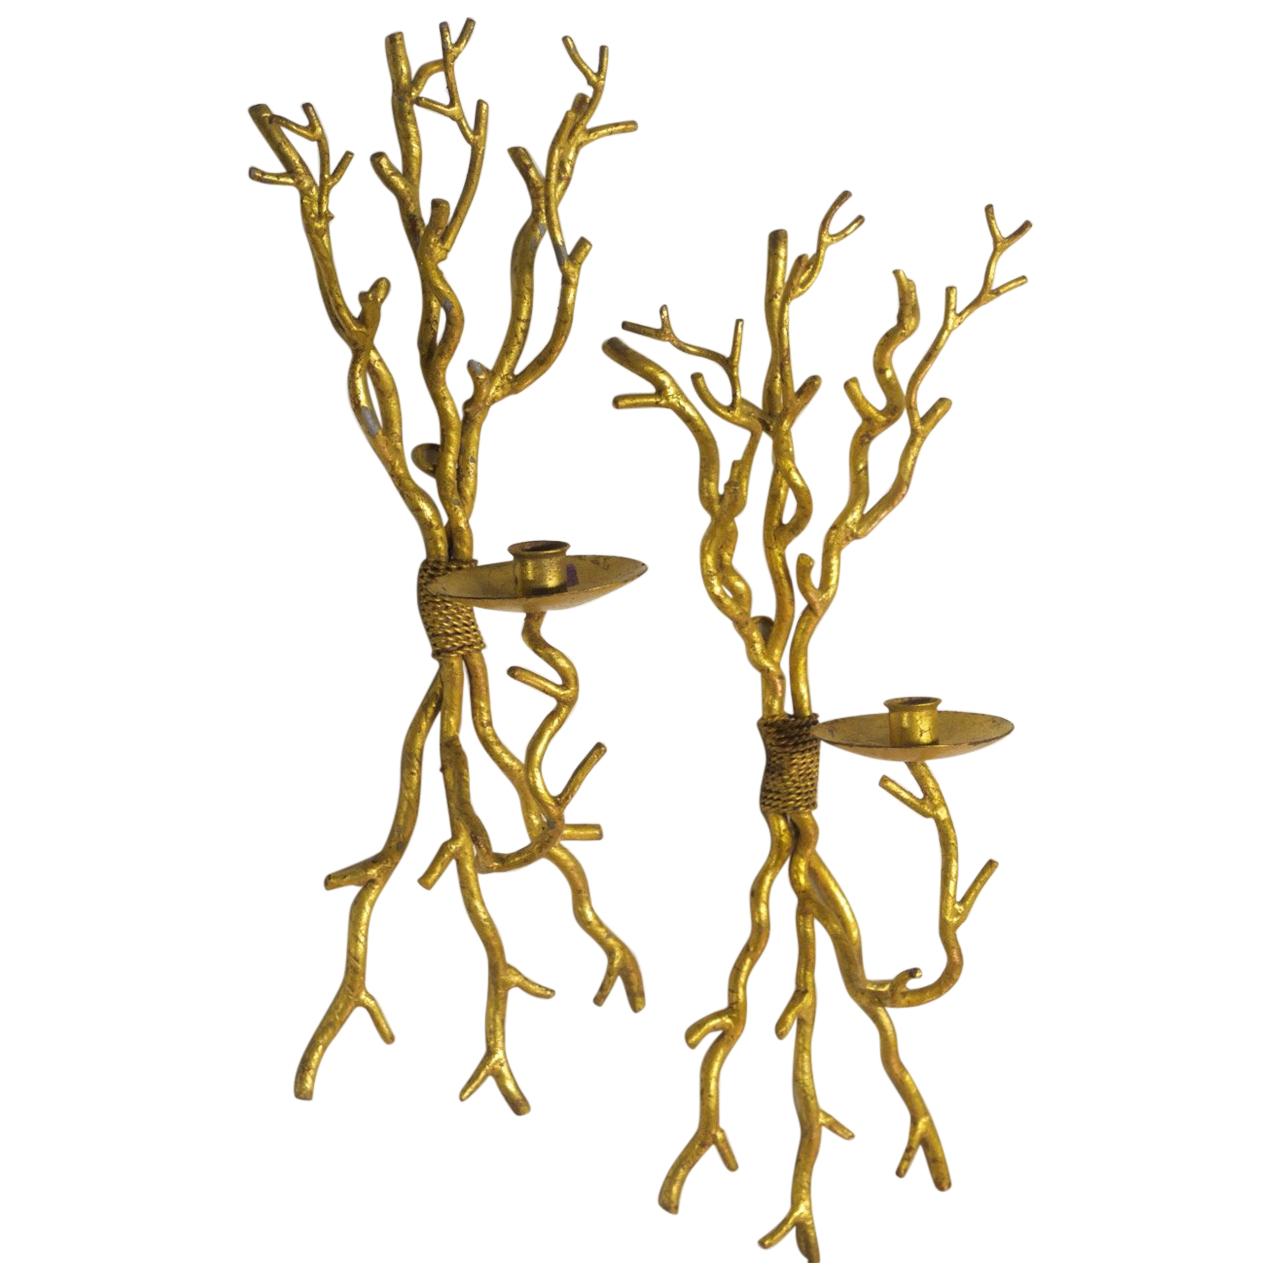 Italian Midcentury Pair of "Branch" Sconces For Sale